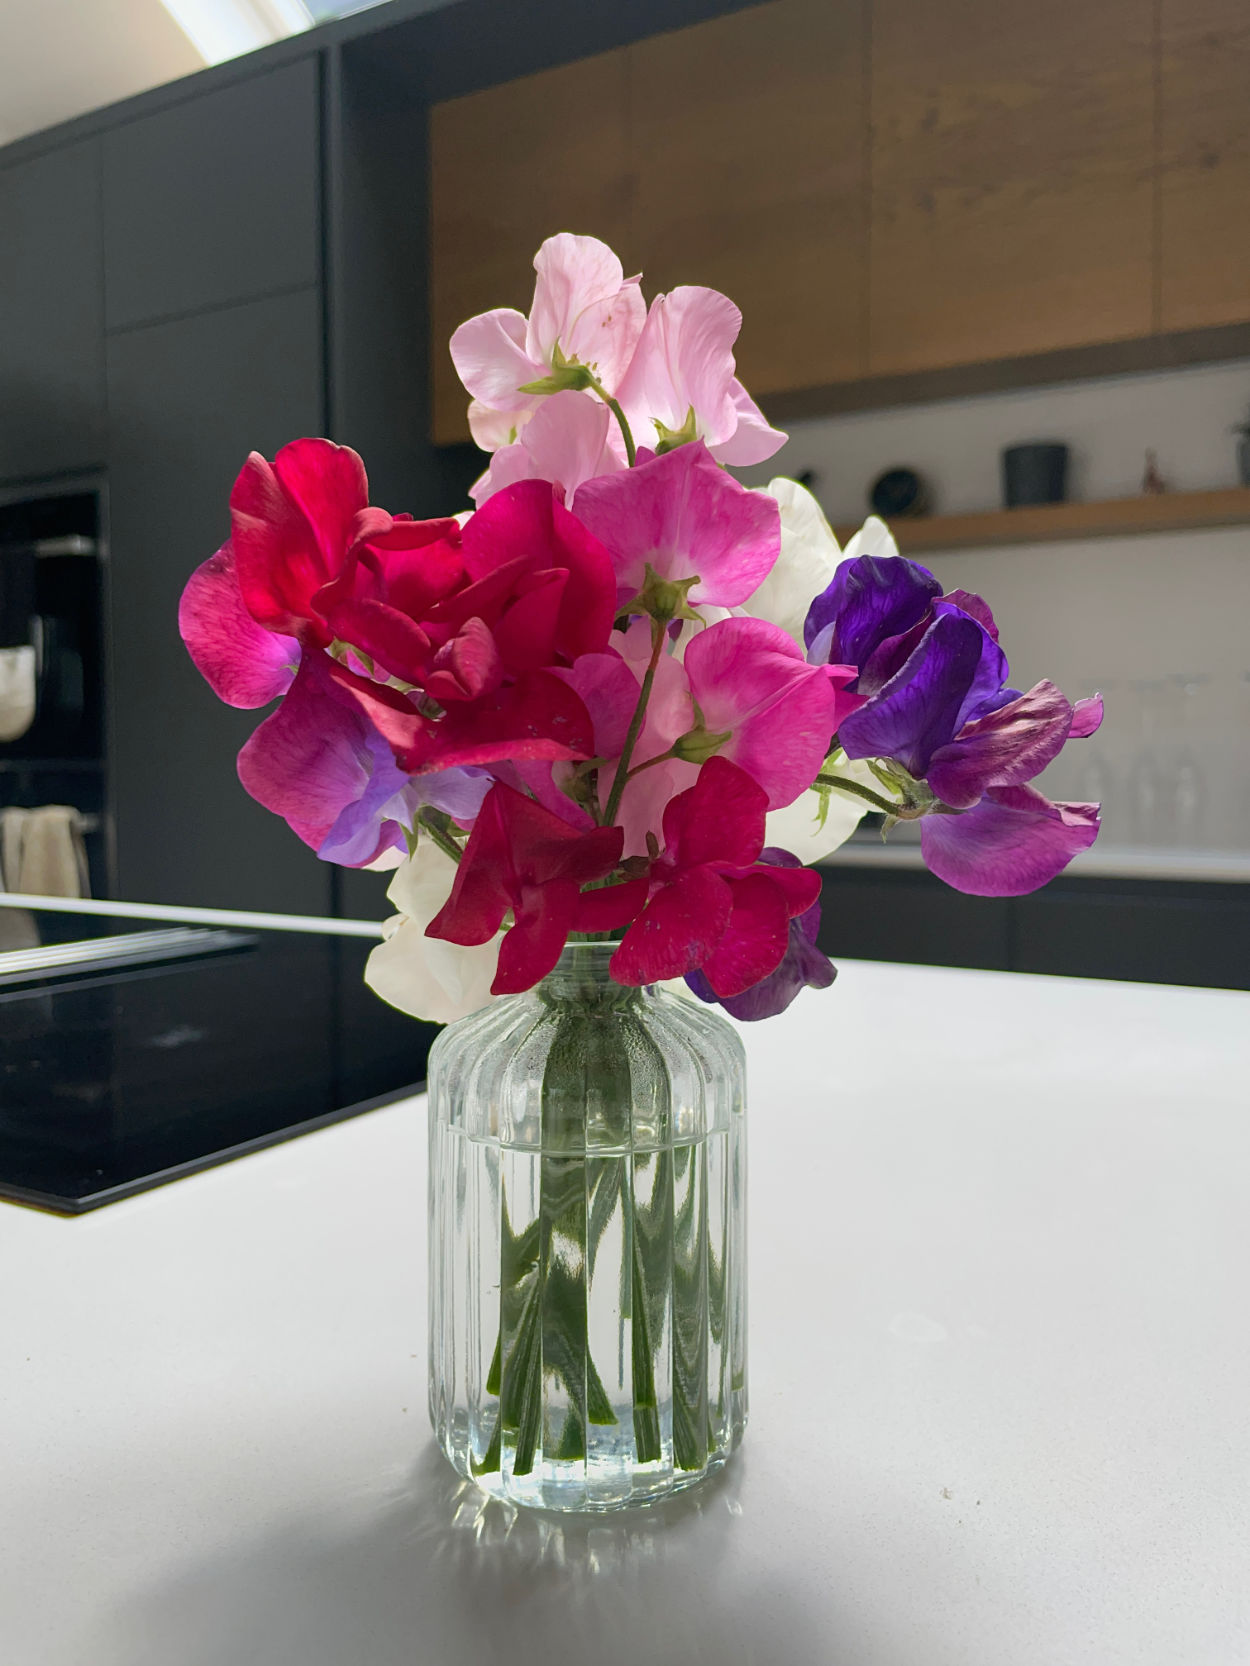 A small bouquet of pink and purple sweet peas in a glass bottle on a white kitchen counter